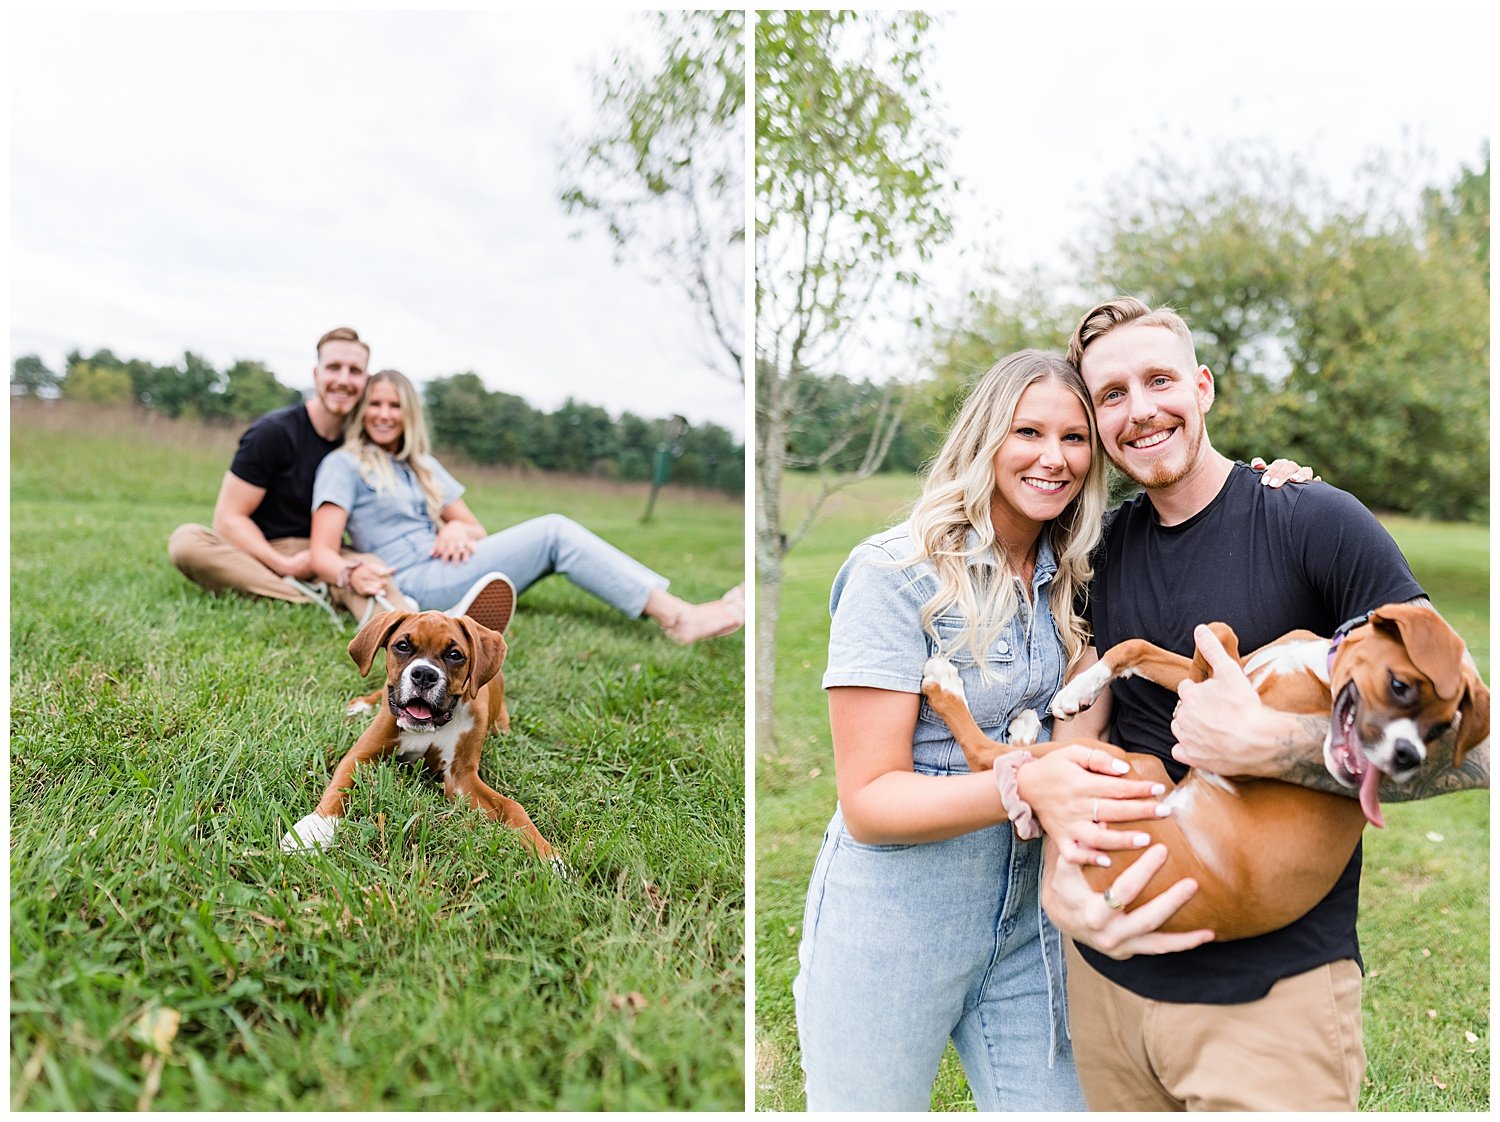 Kennett-Square-PA-engagement-session-with-a-puppy-Longwood-Gardens5.jpg